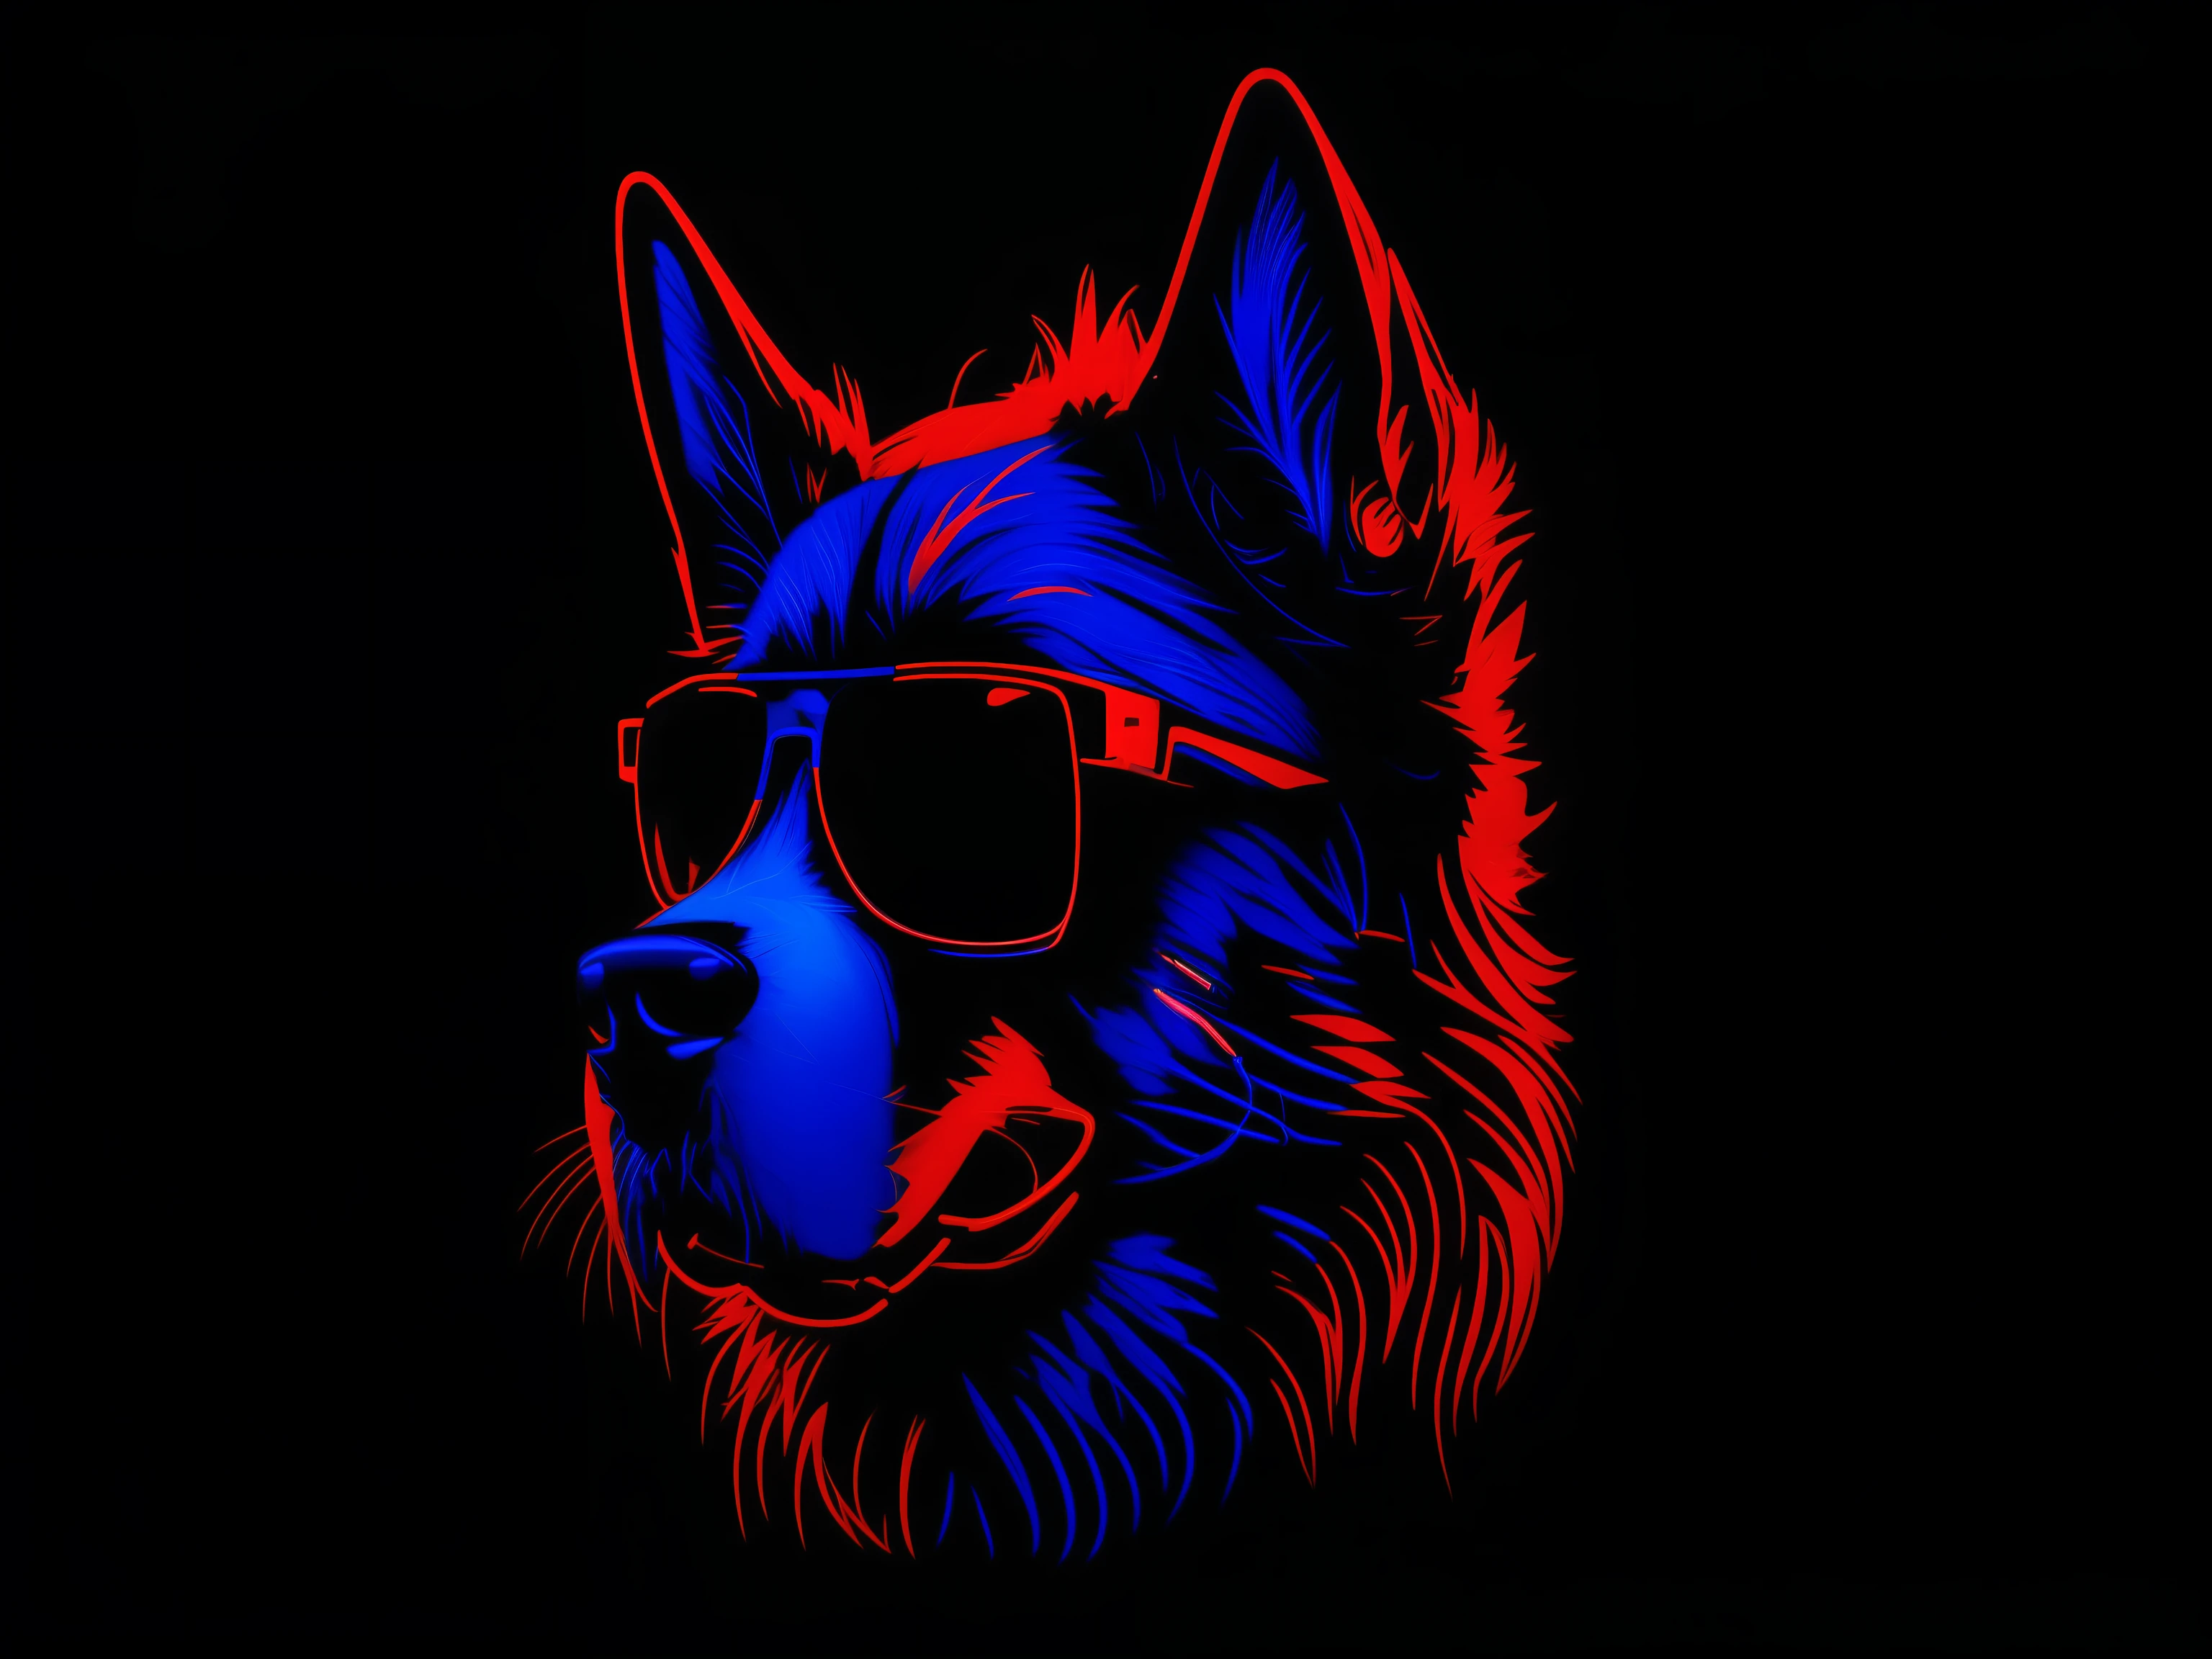 a close up of a dog wearing sunglasses on a black background, phone wallpaper hd, synthwave art style, hd phone wallpaper, looking heckin cool and stylish, furry digital art, red and blue neon, neon art style, husky in shiny armor, synthwave art style ]!!, in style of digital illustration, flat synthwave art style, phone wallpaper